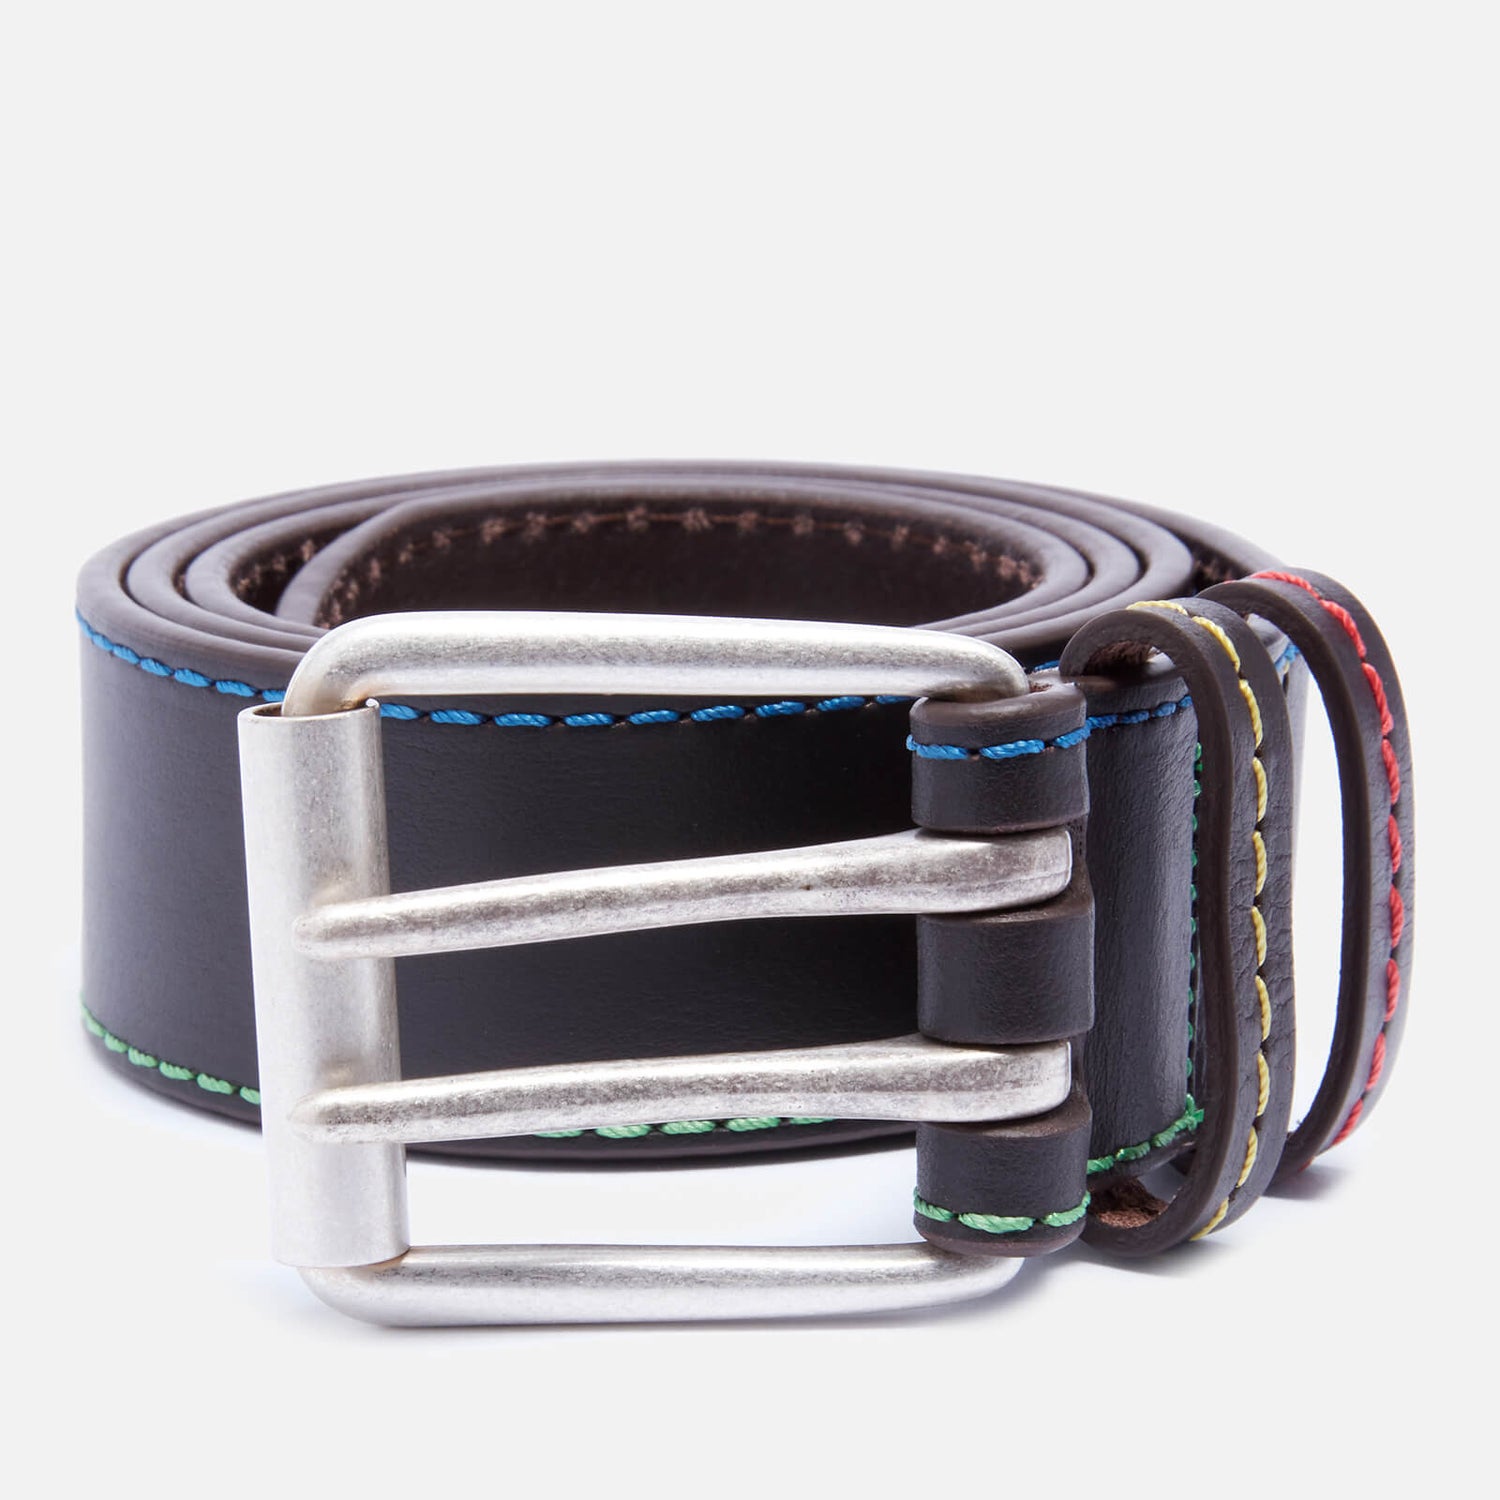 PS Paul Smith Men's Stitch Detail Classic Leather Belt - Chocolate Brown - W30